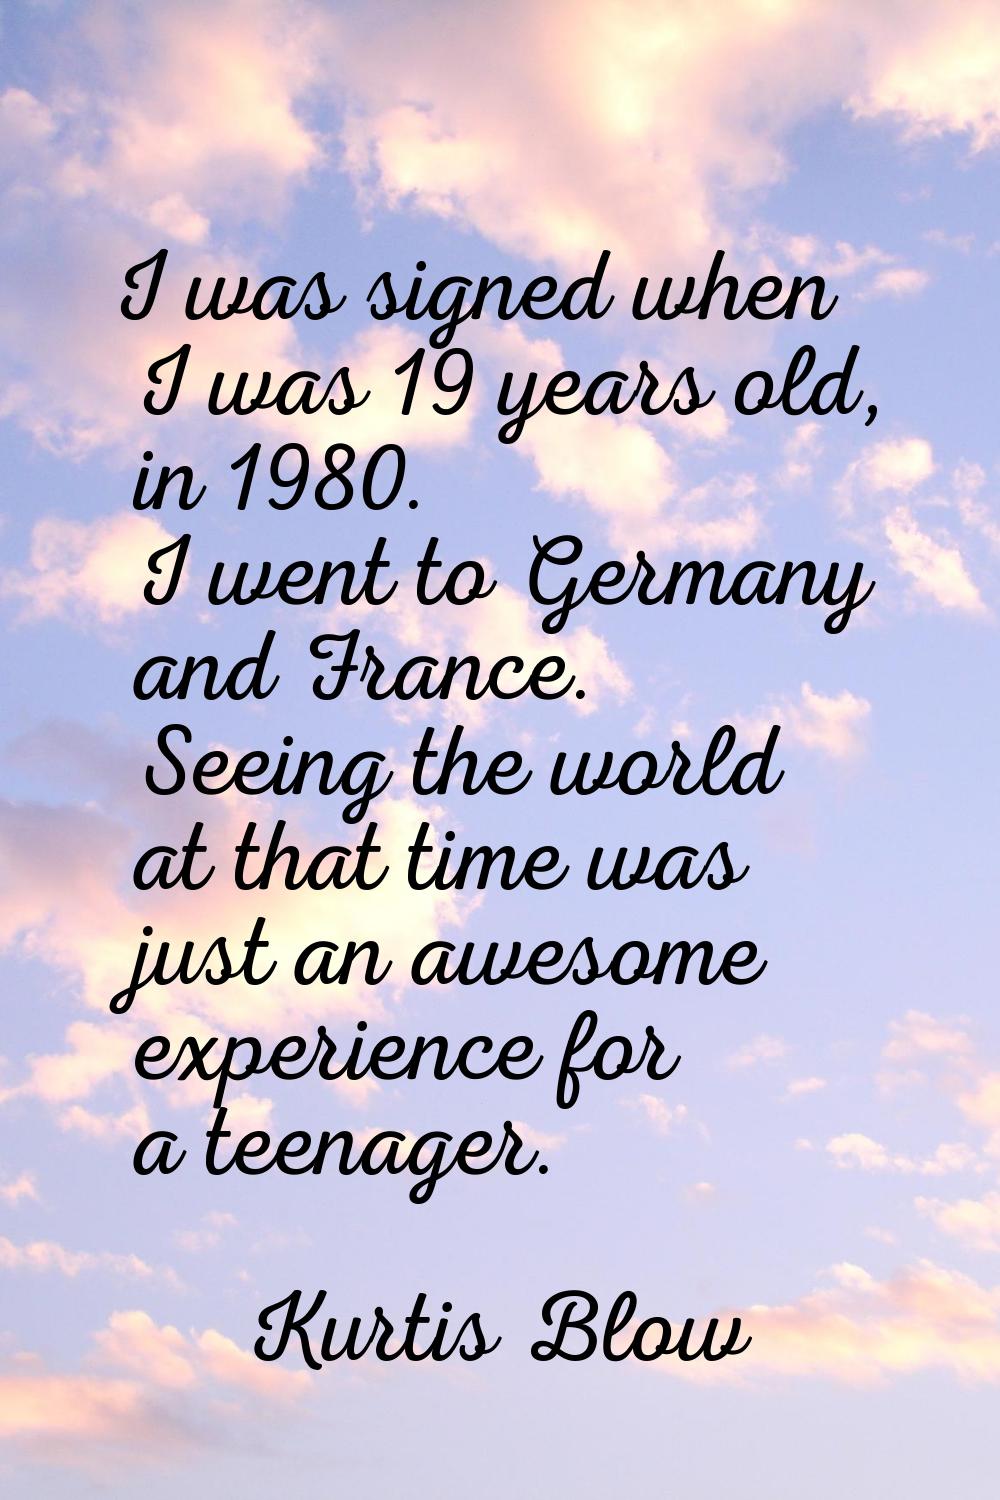 I was signed when I was 19 years old, in 1980. I went to Germany and France. Seeing the world at th